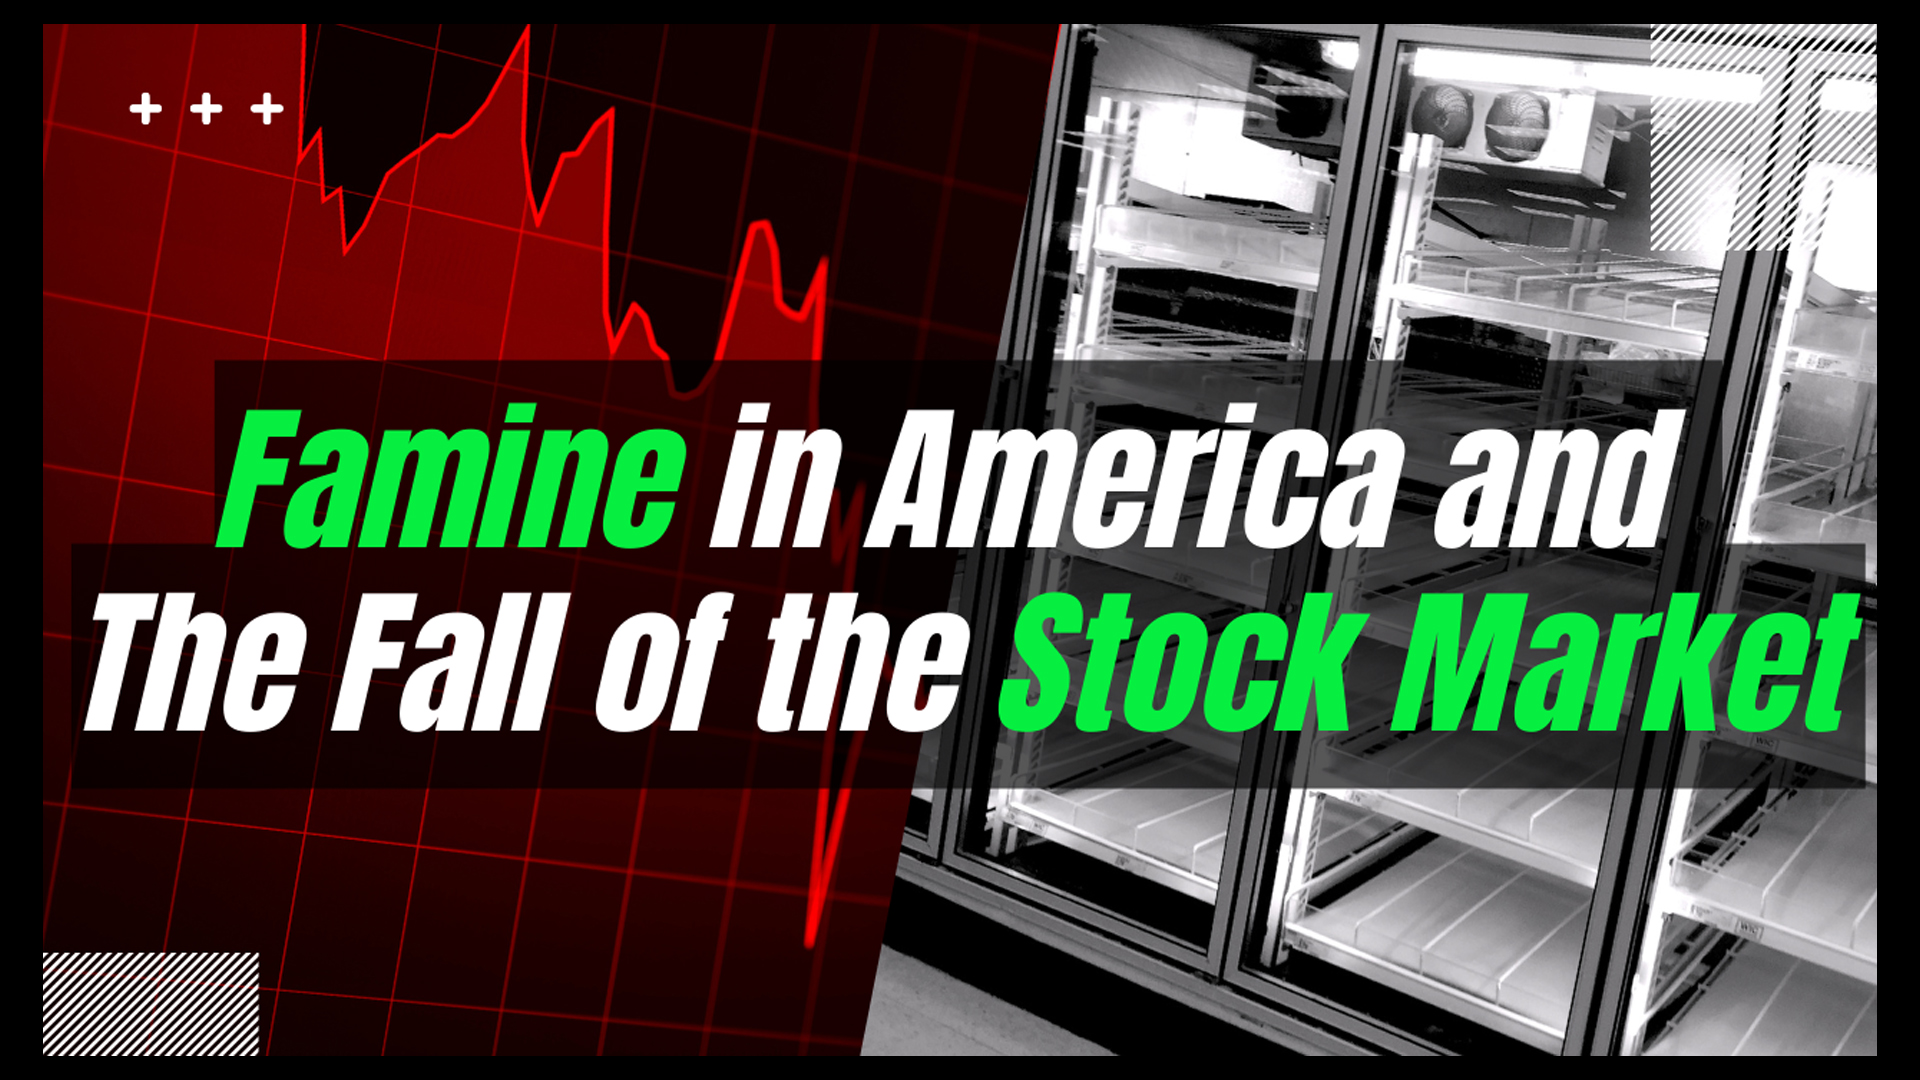 Famine in America and the Fall of the Stock Market